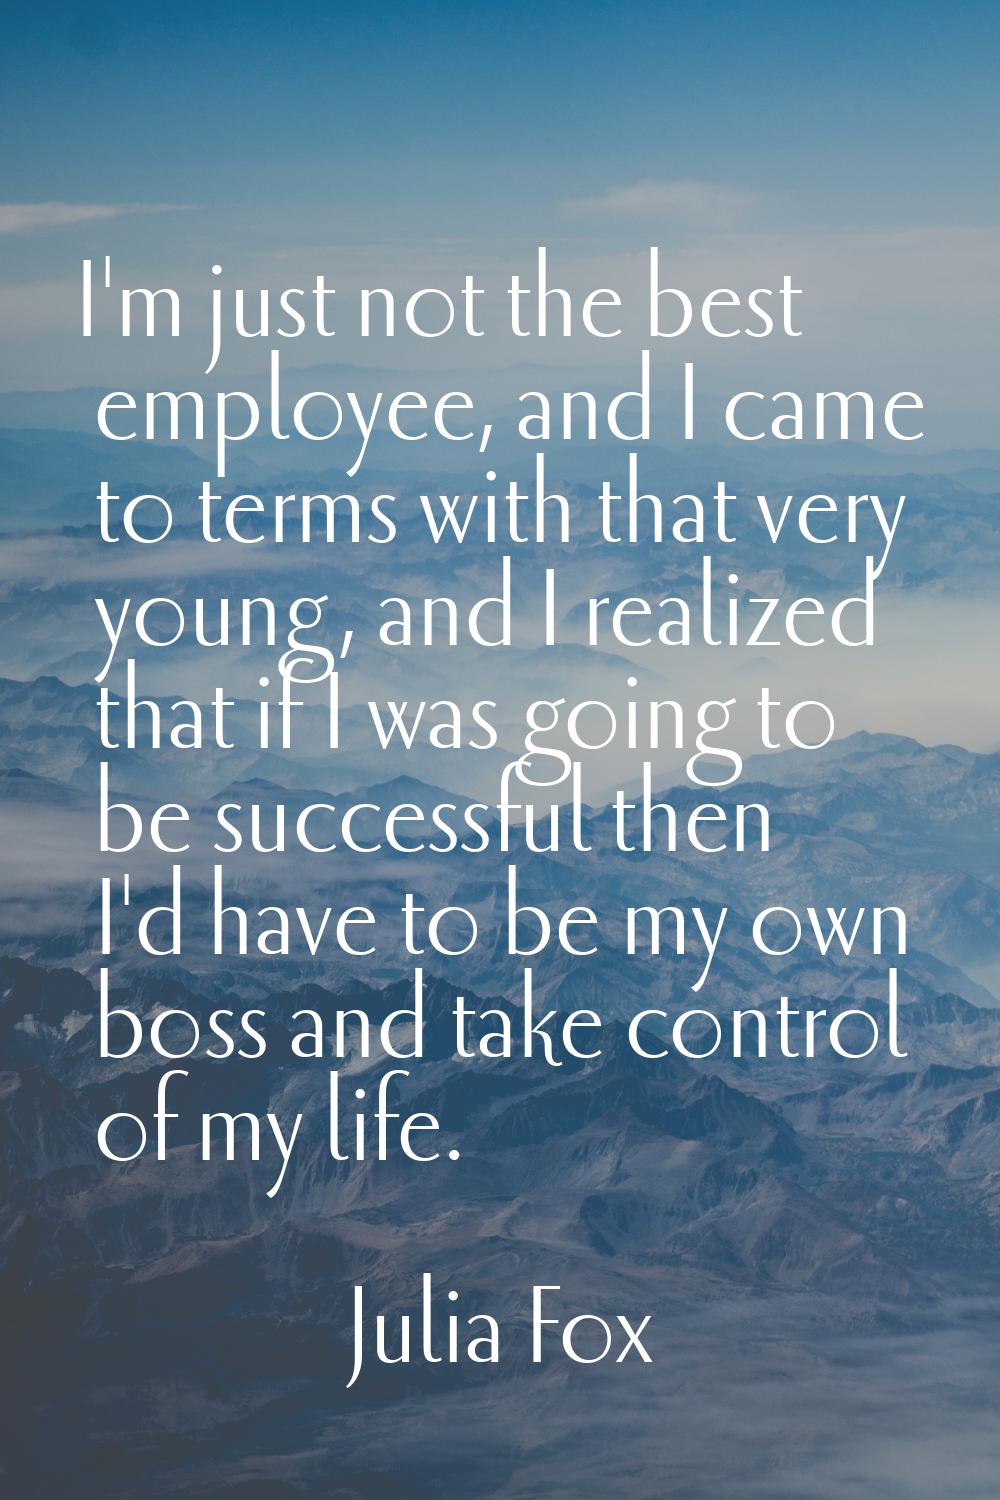 I'm just not the best employee, and I came to terms with that very young, and I realized that if I 